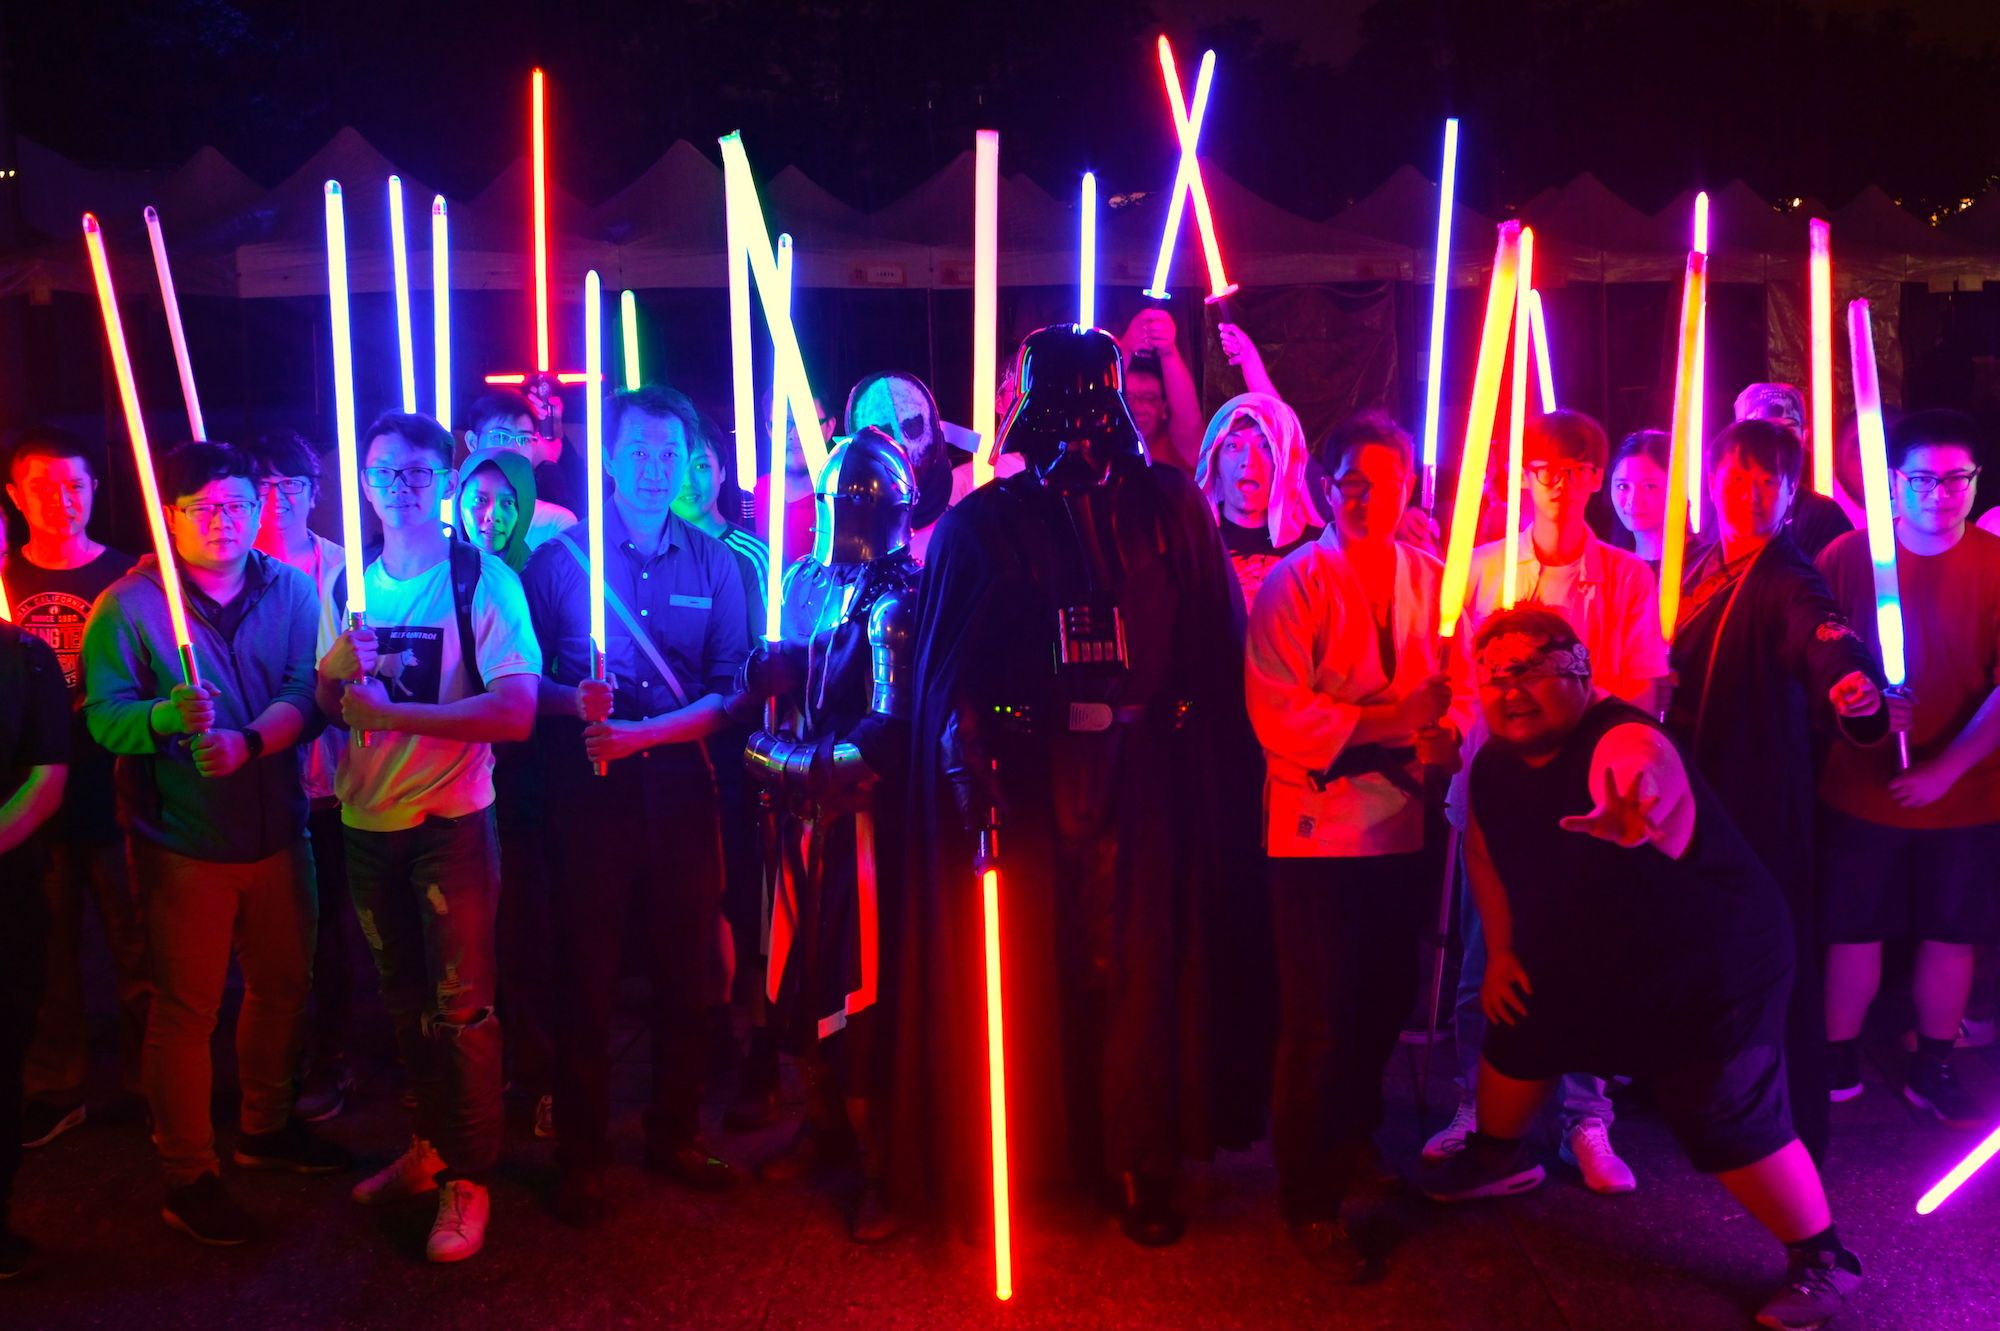 Star Wars fans with model lightsabers